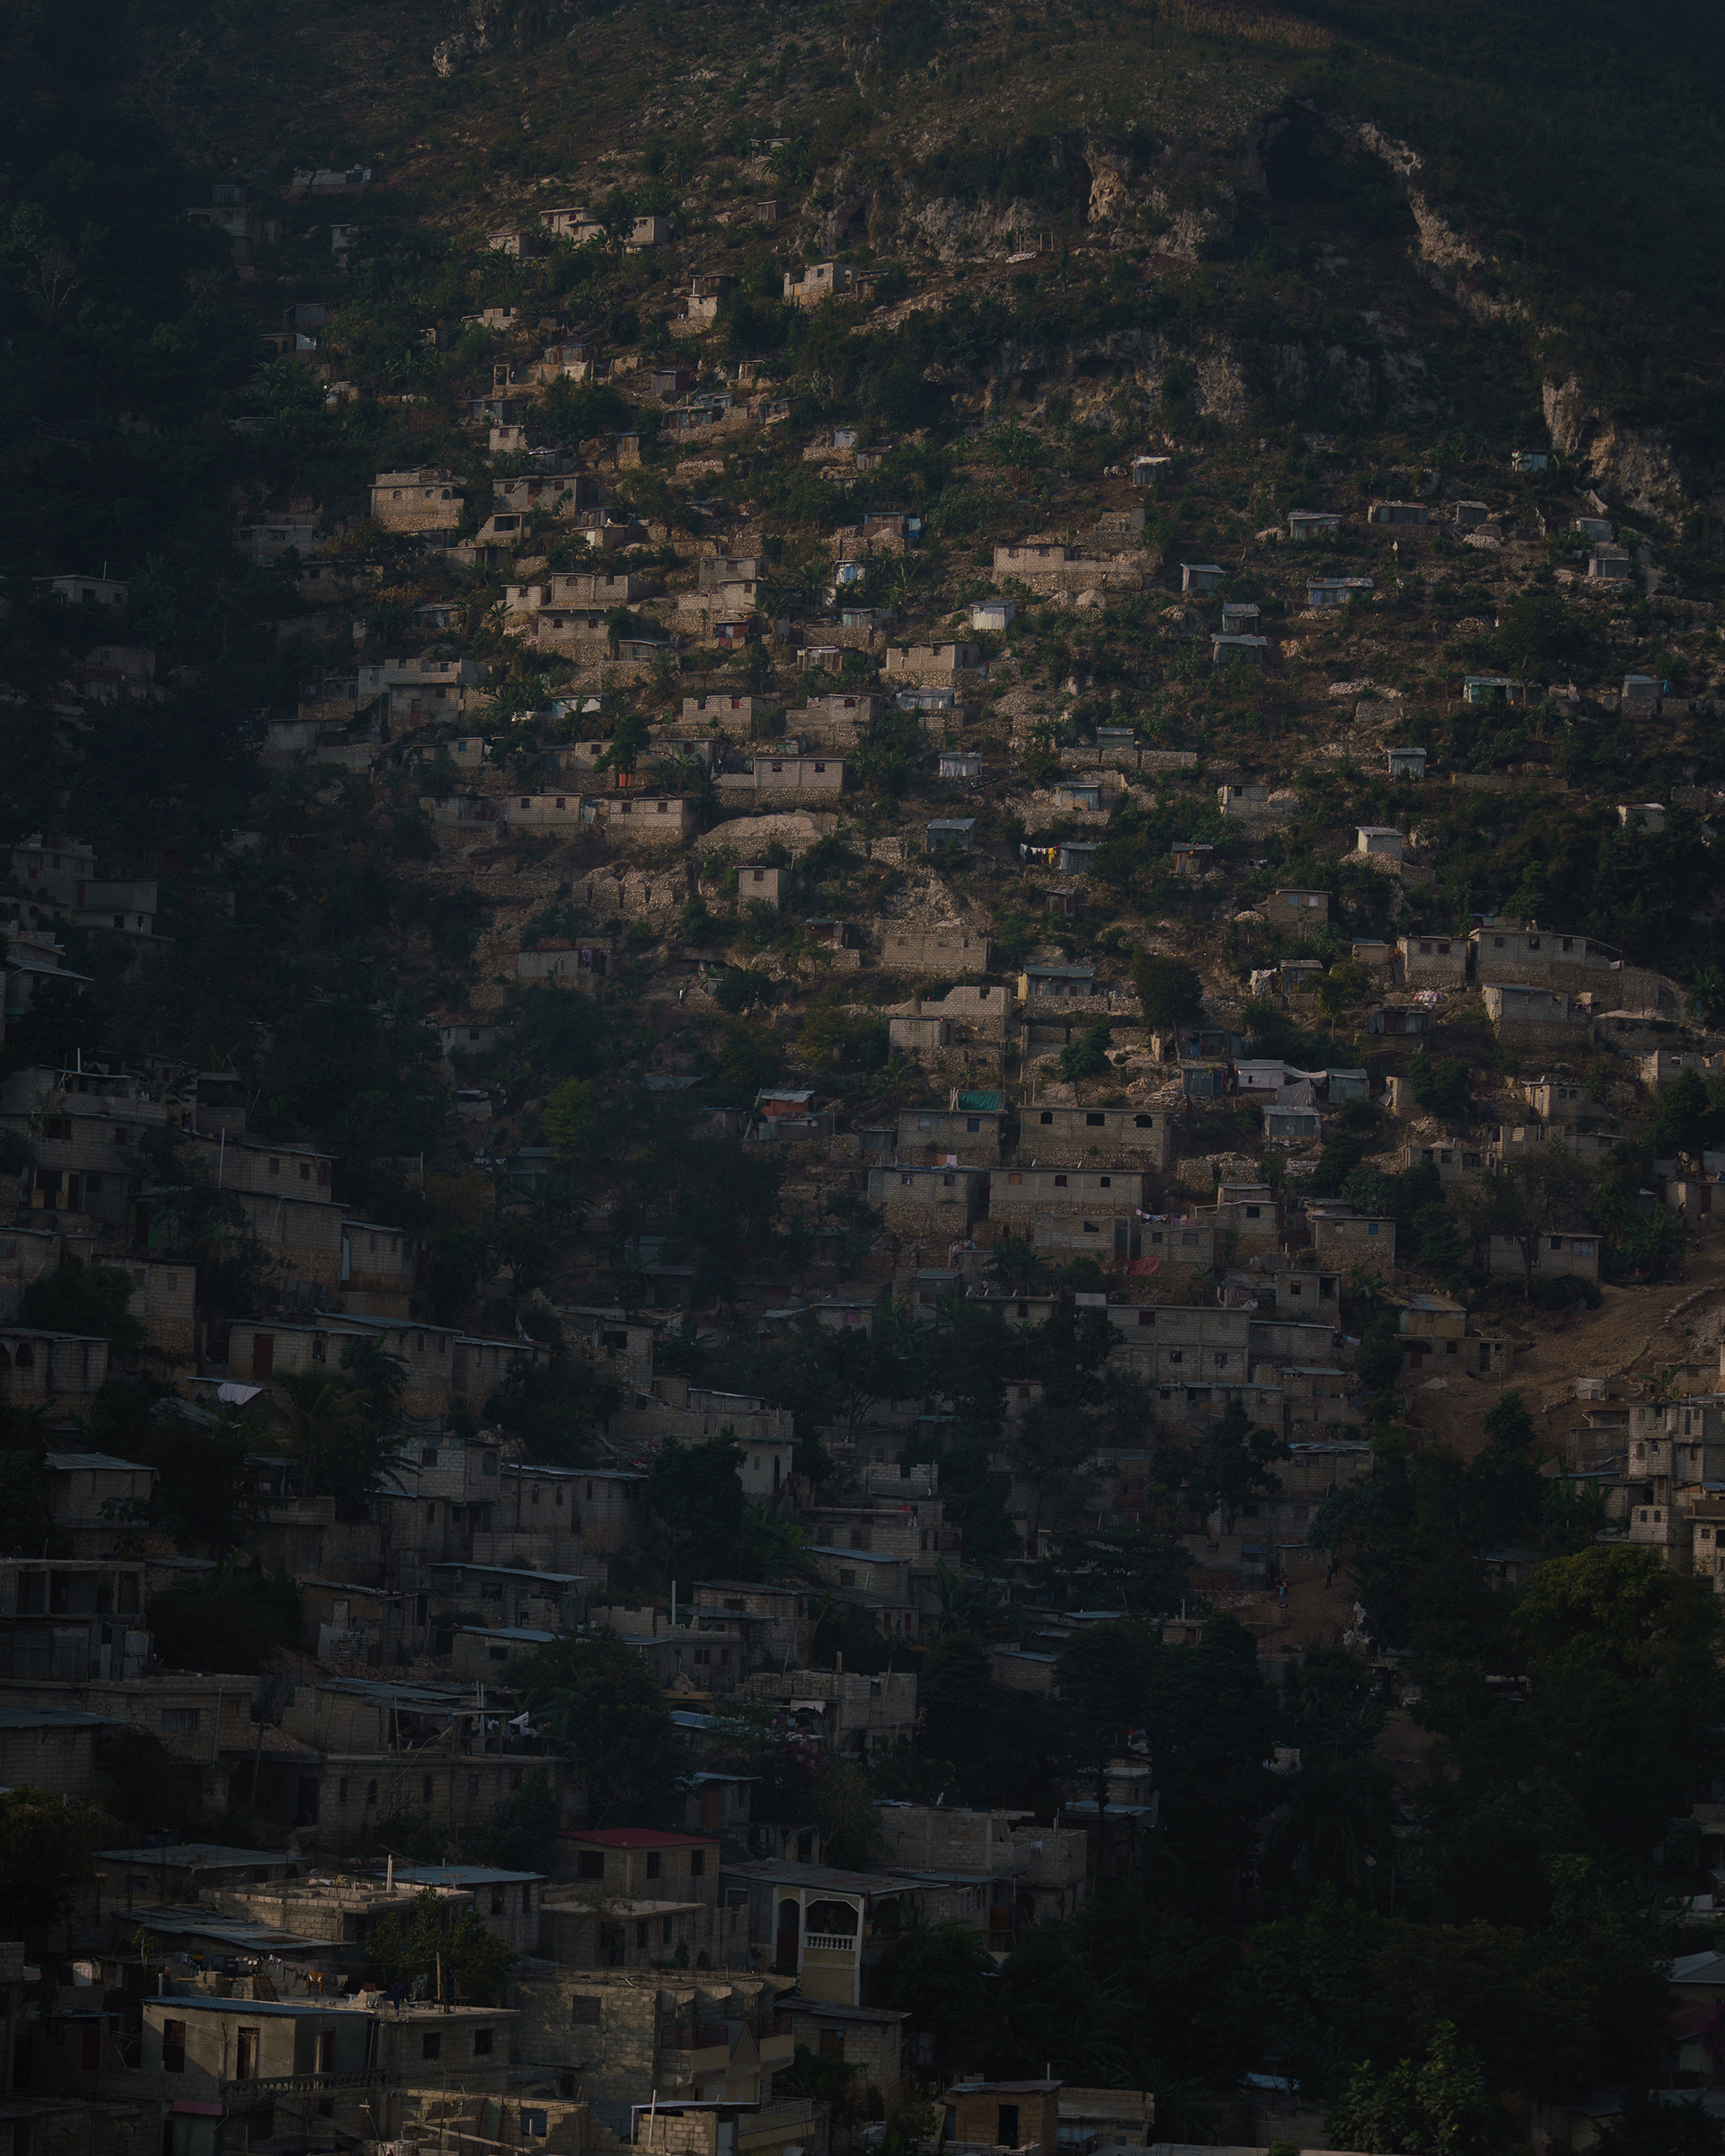 Homes built on the hills surround the city in Port-au-Prince, Haiti on Monday January 24, 2022.